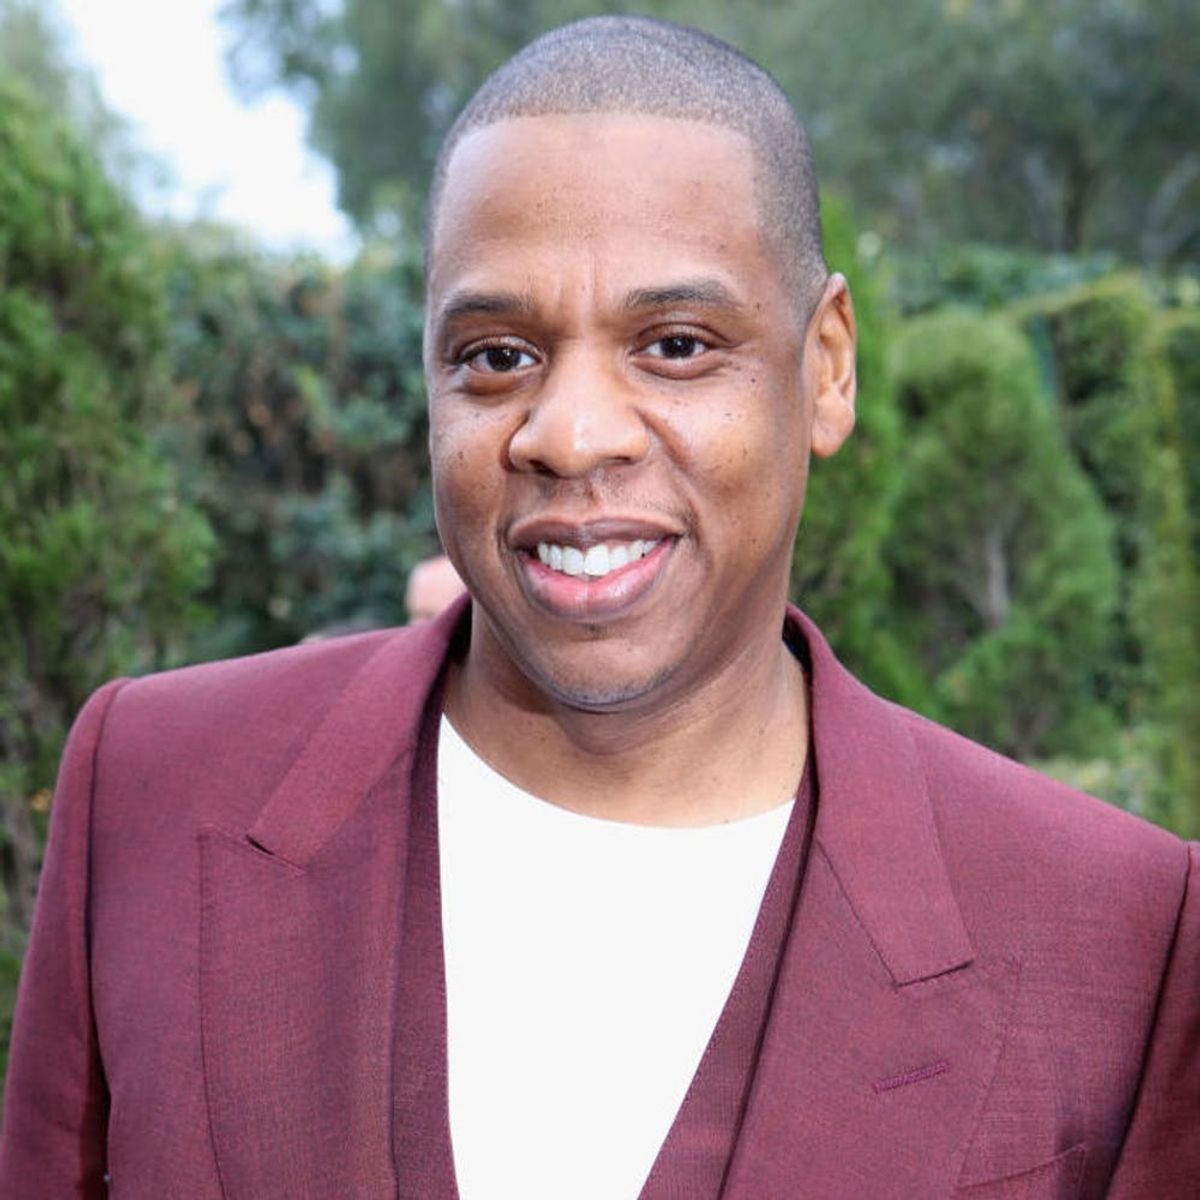 People Think JAY-Z’s 4:44 Album Title Has a Connection to That Elevator Fight